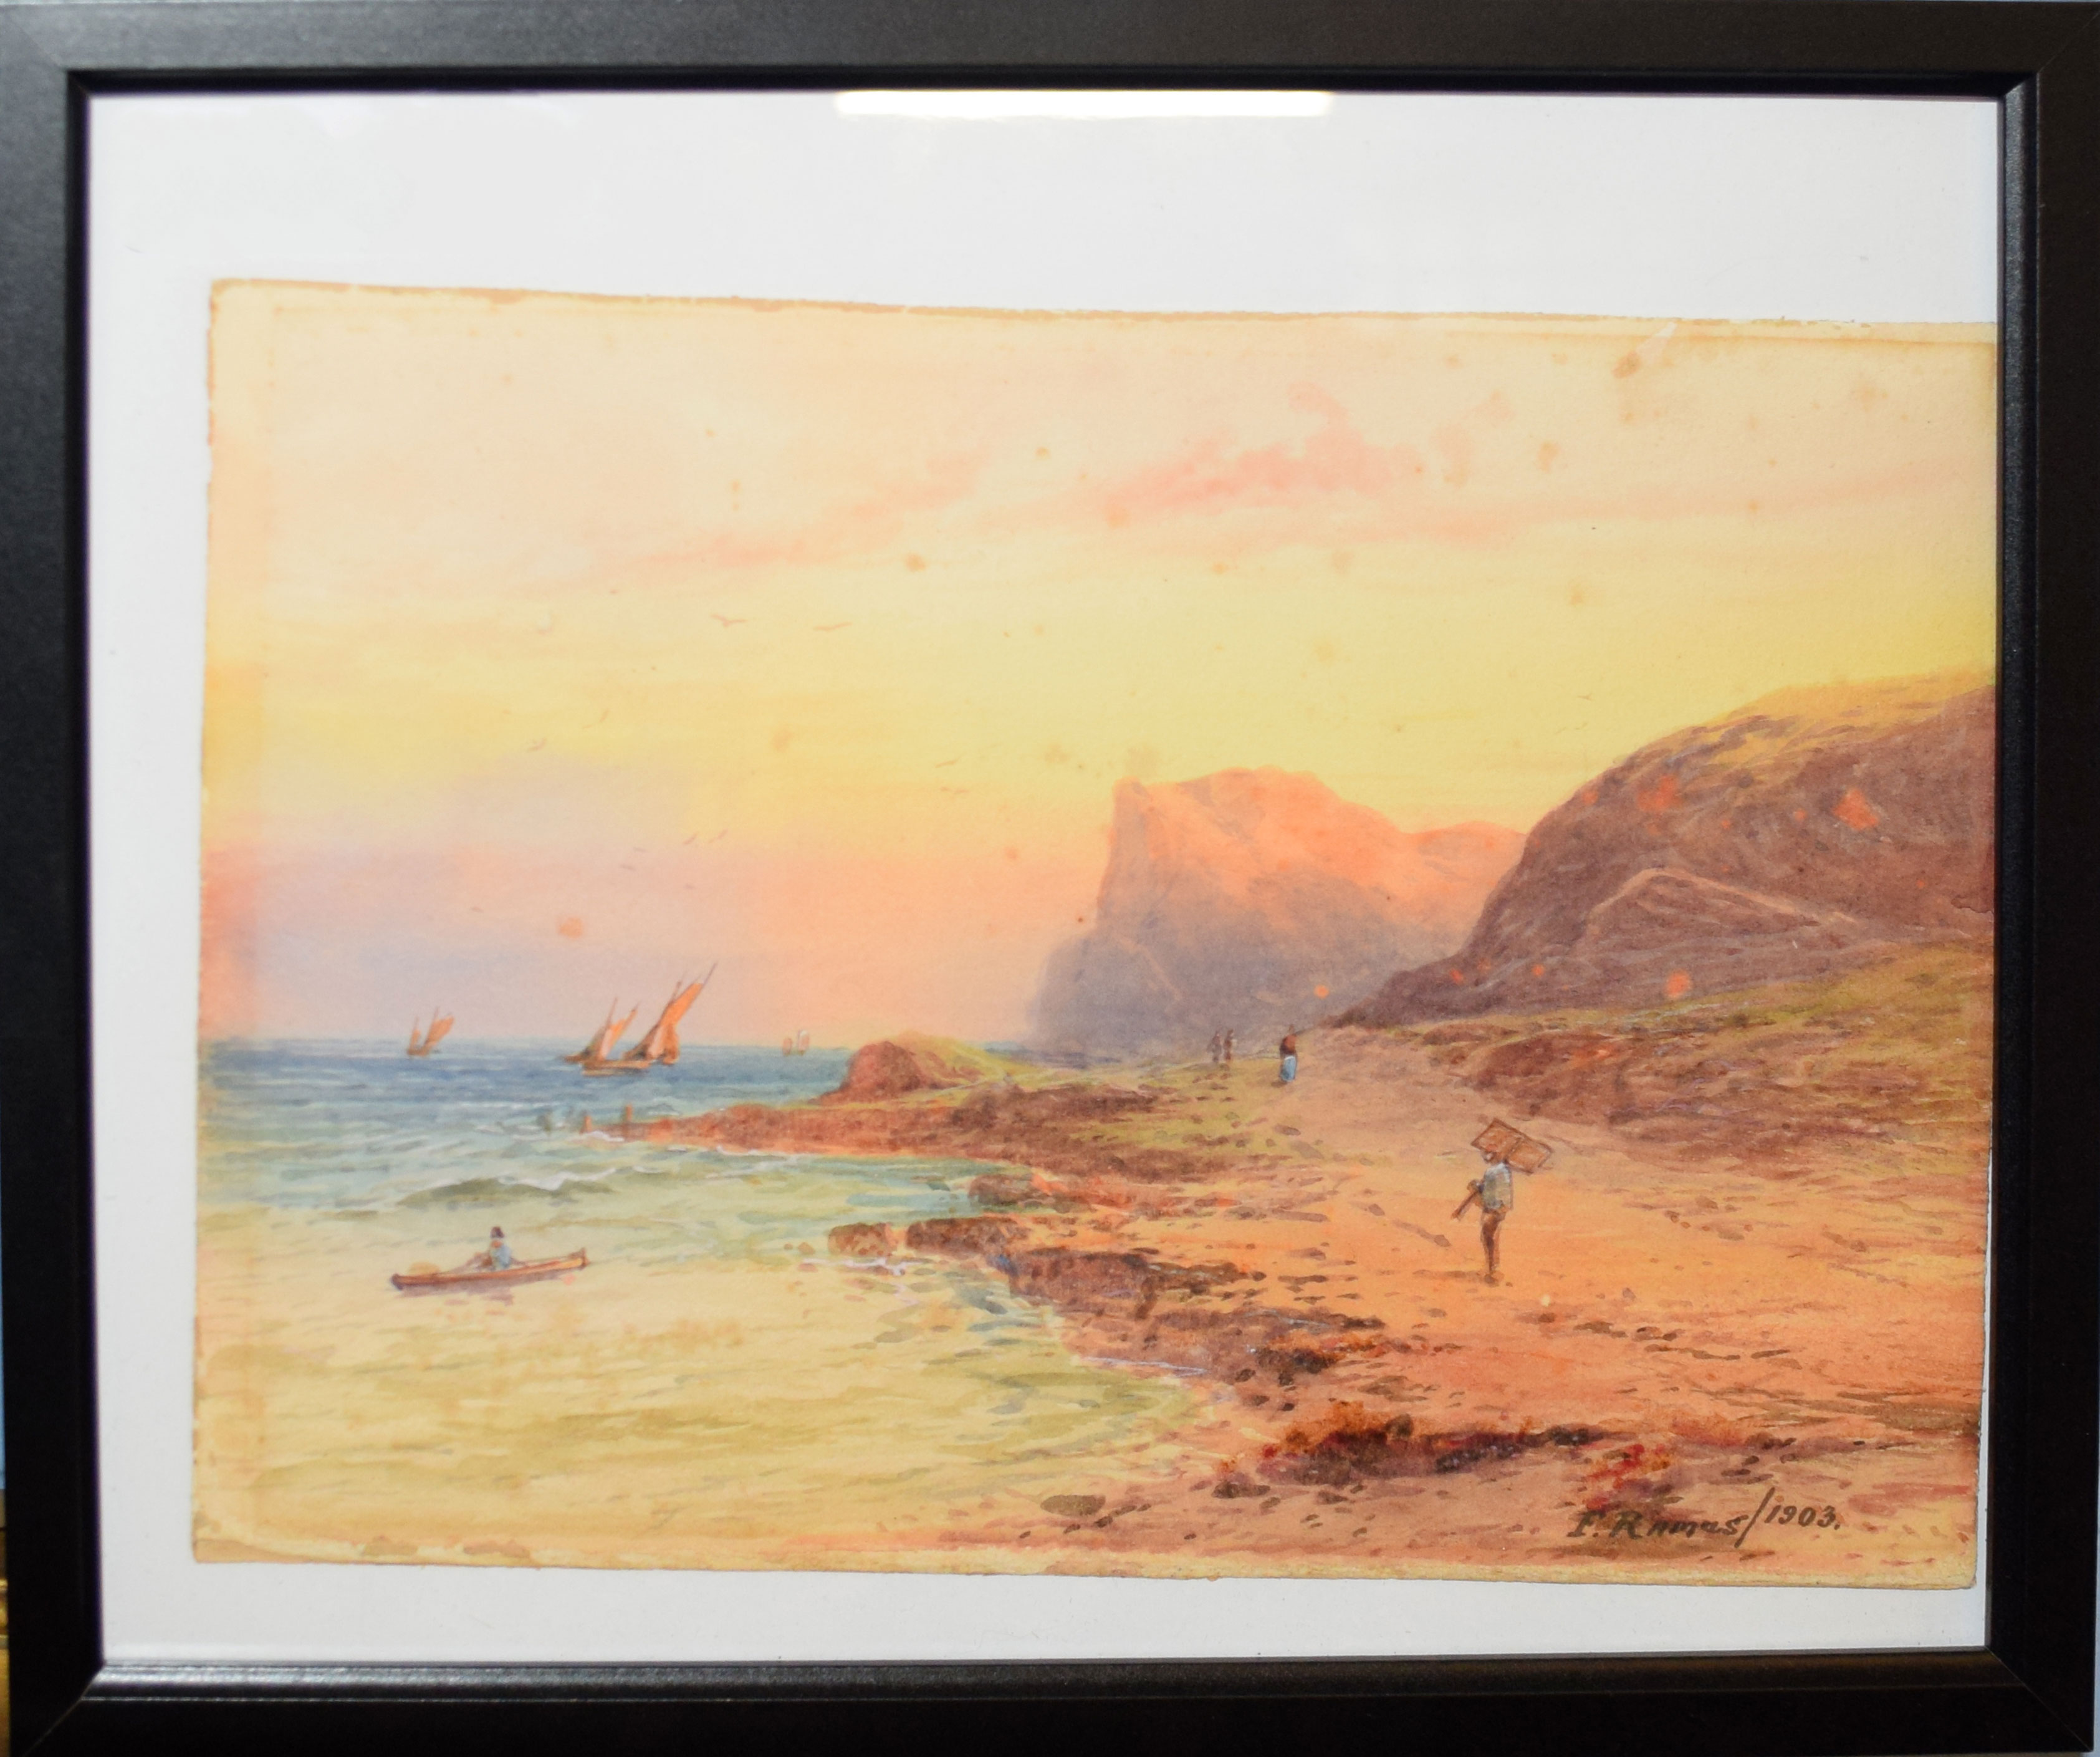 F Ramus, Coastal scene, watercolour, signed and dated 1903 lower right, 20 x 28cm, together with a